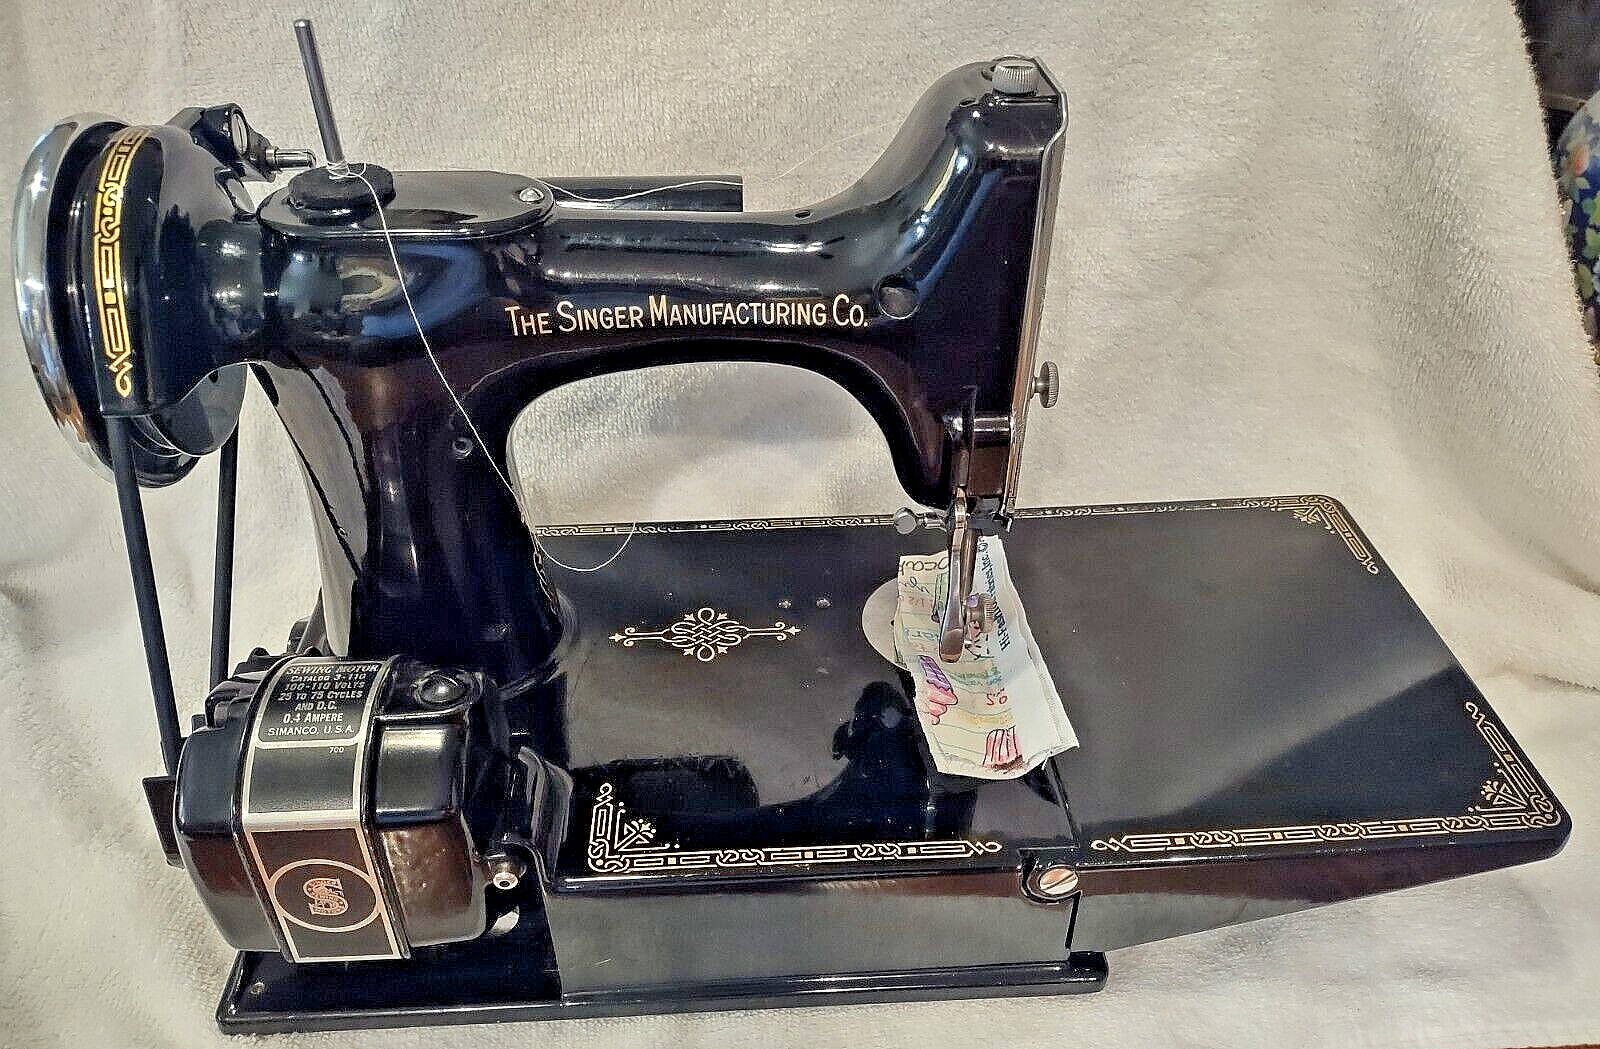 ANTIQUE 1940’S Singer Sewing Machine Complete W/ Case Serviced & Working #3004CH